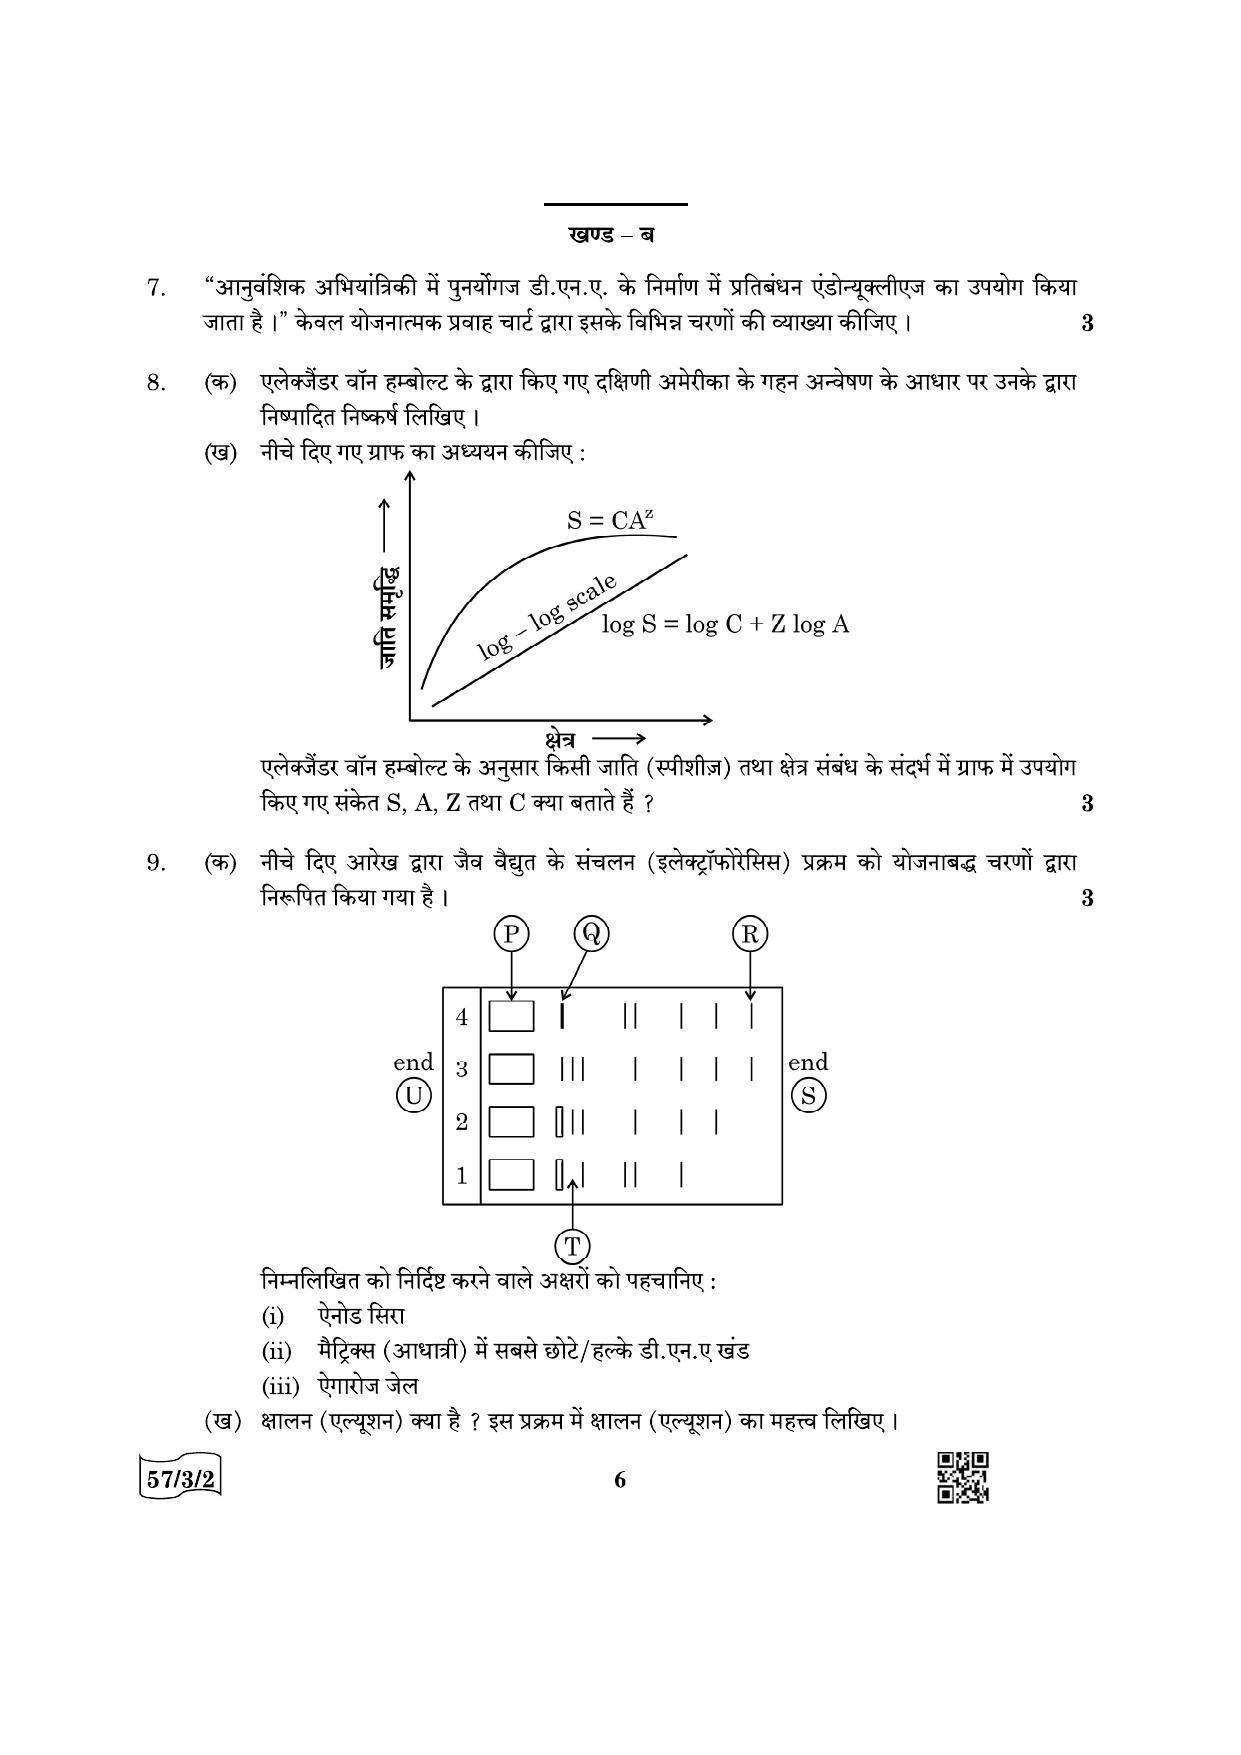 CBSE Class 12 57-3-2 Biology 2022 Question Paper - Page 6